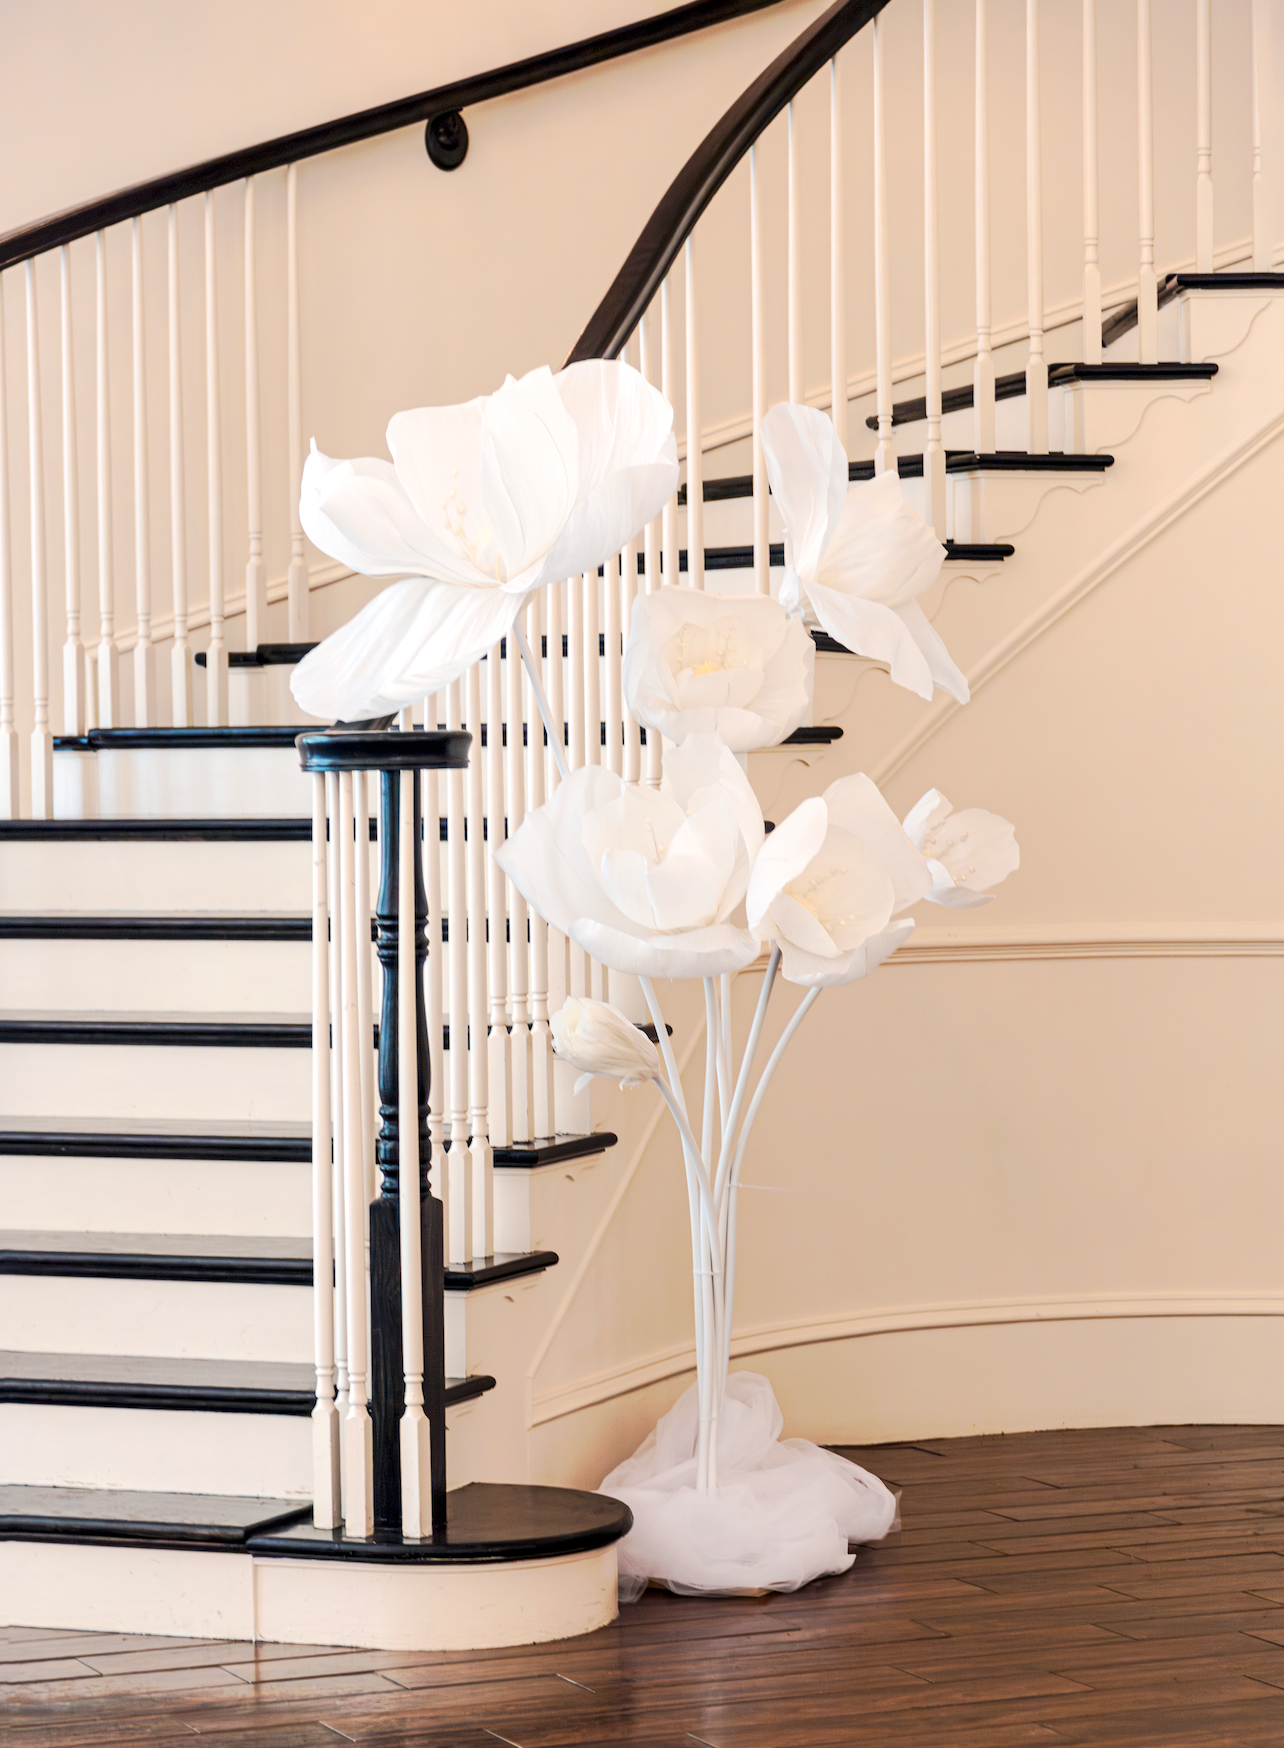 Giant White Flowers stairs decor